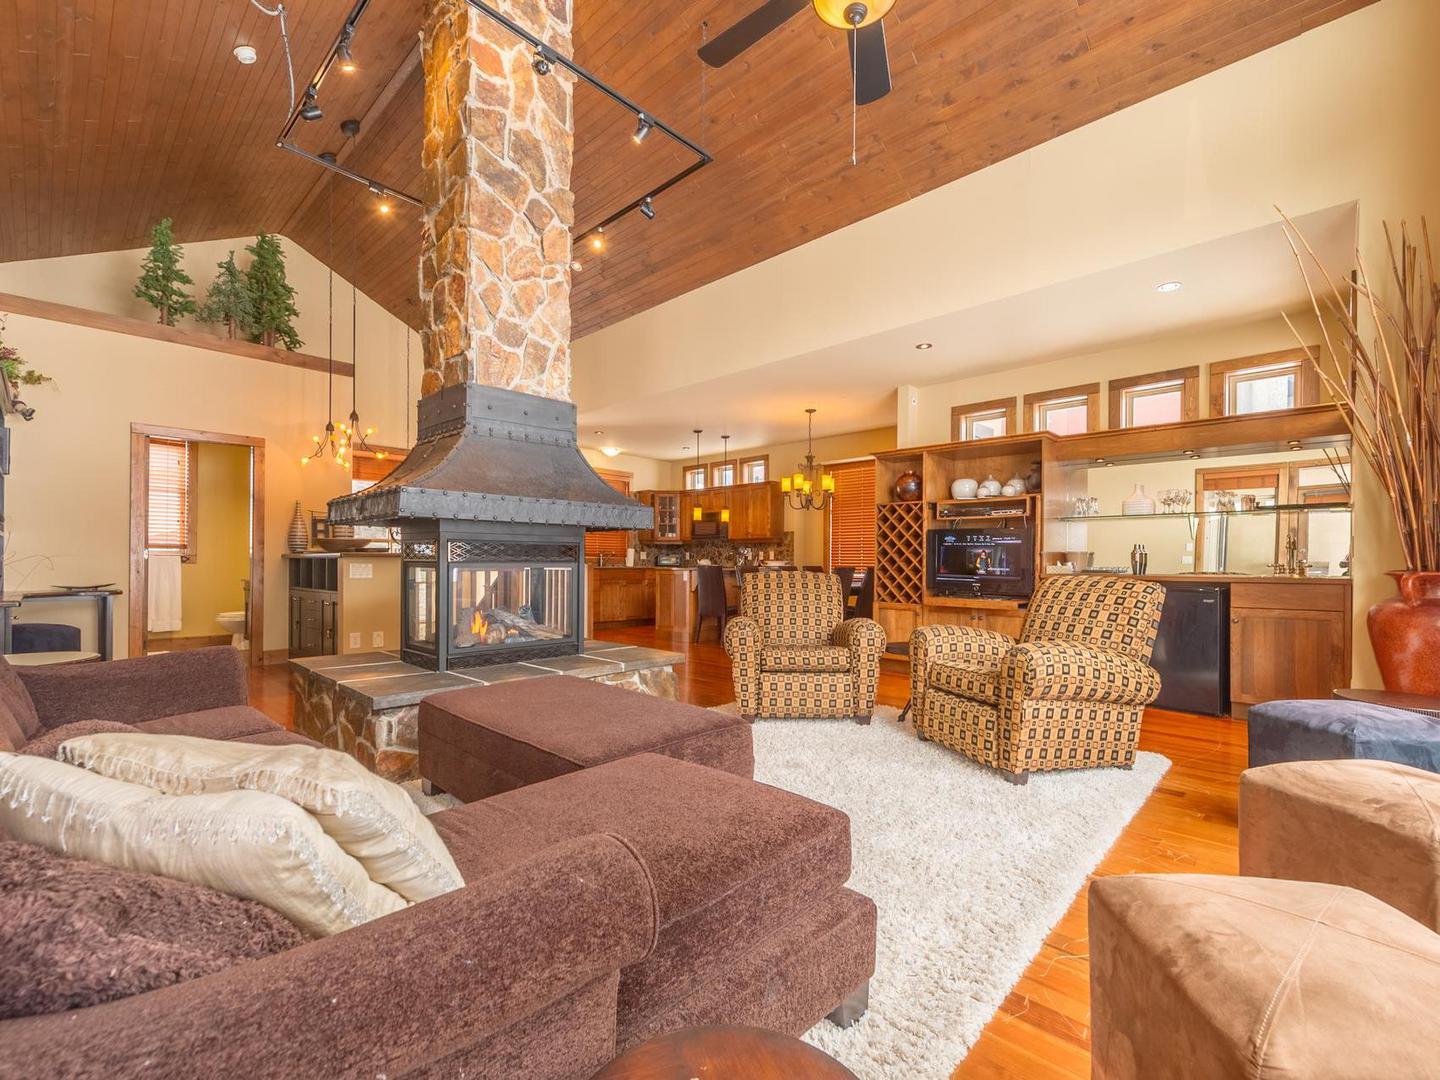 The open concept living room, kitchen and dining room, with a free standing fireplace as the focal point, with wood and stone accents in South Point #15 at Big White Ski Resort.